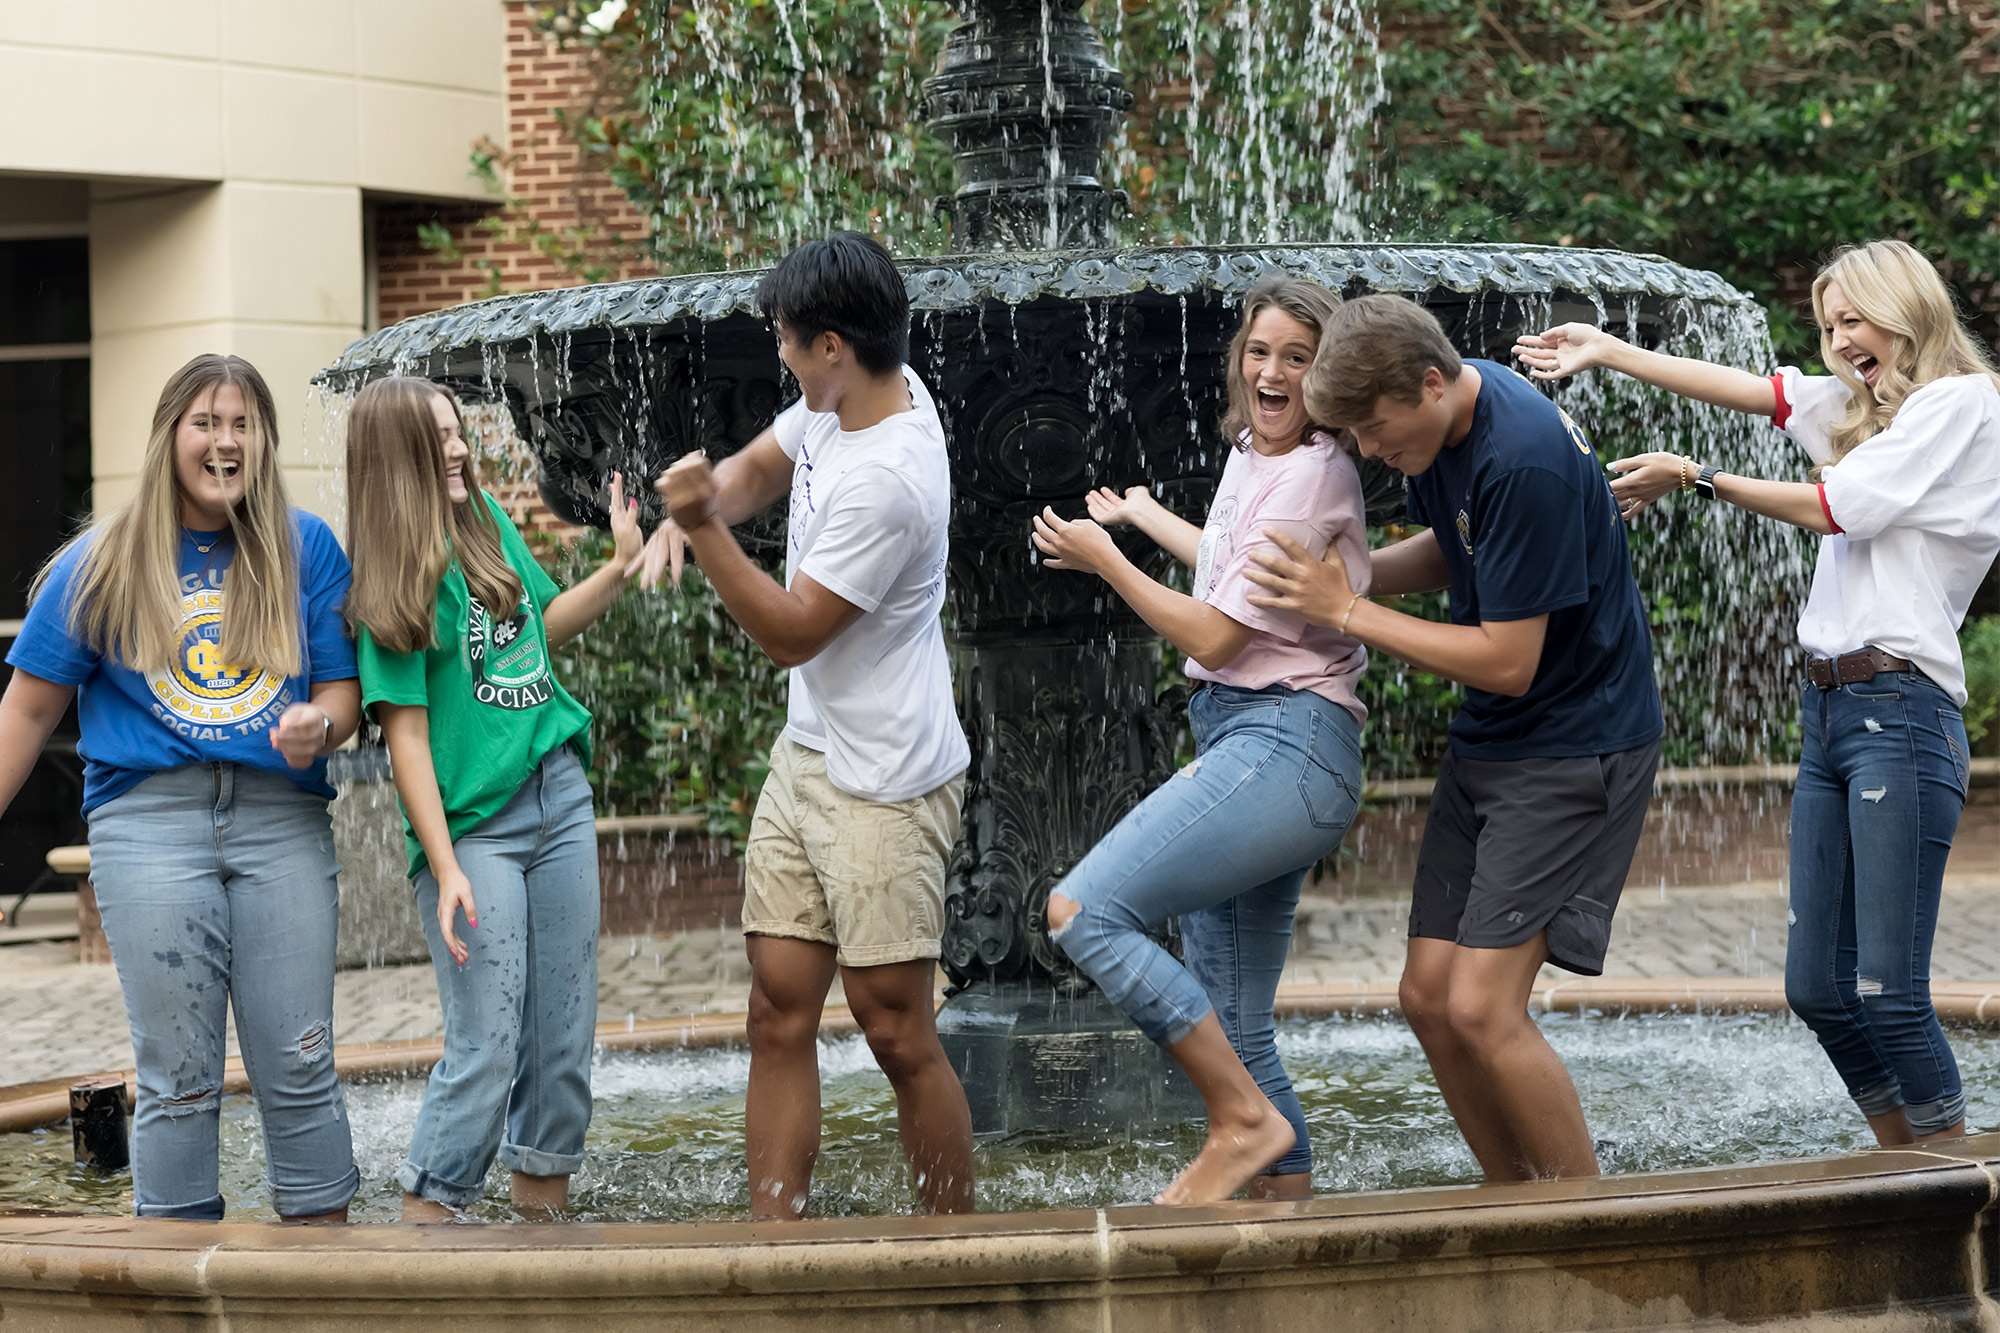 Students dancing in the fountain